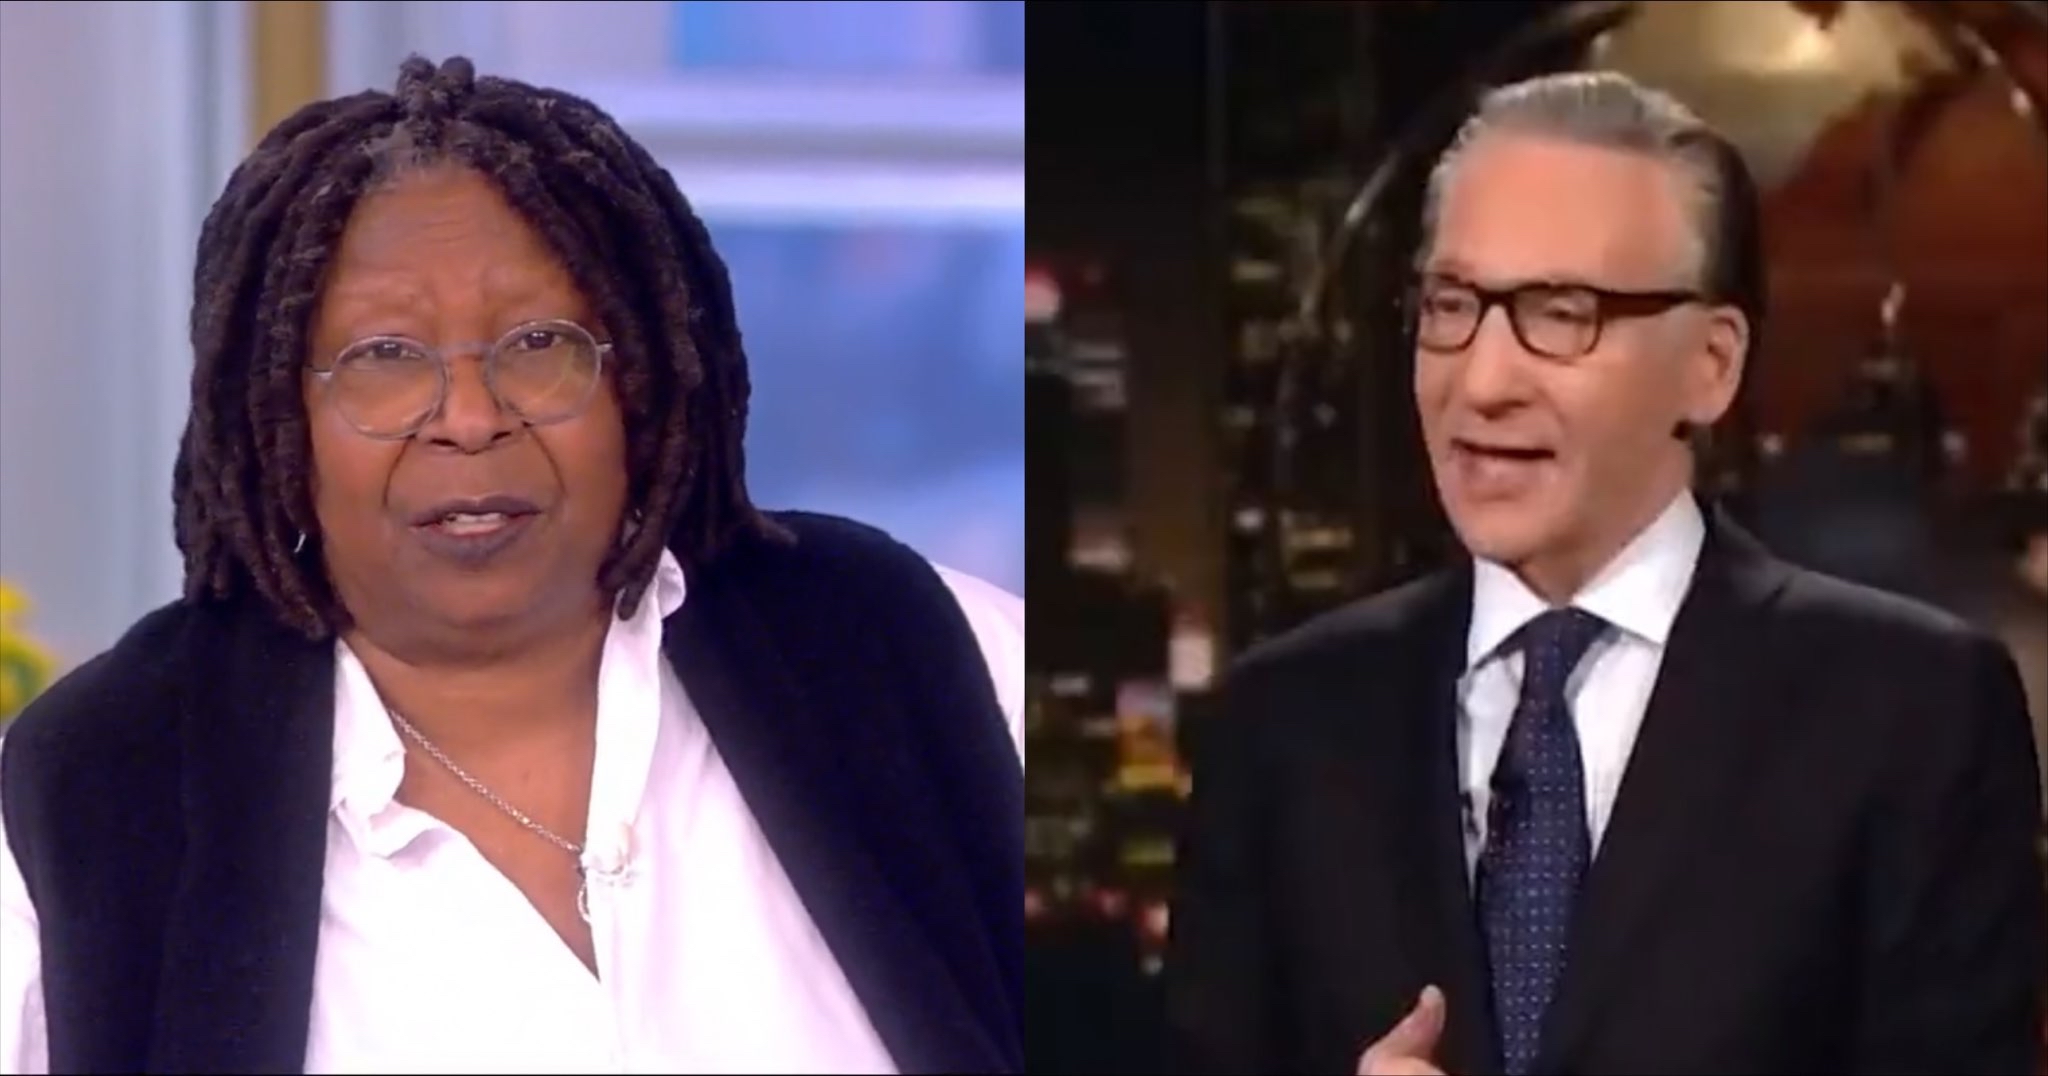 Whoopi Goldberg Lectures Bill Maher For Saying He's Done With 'Masked